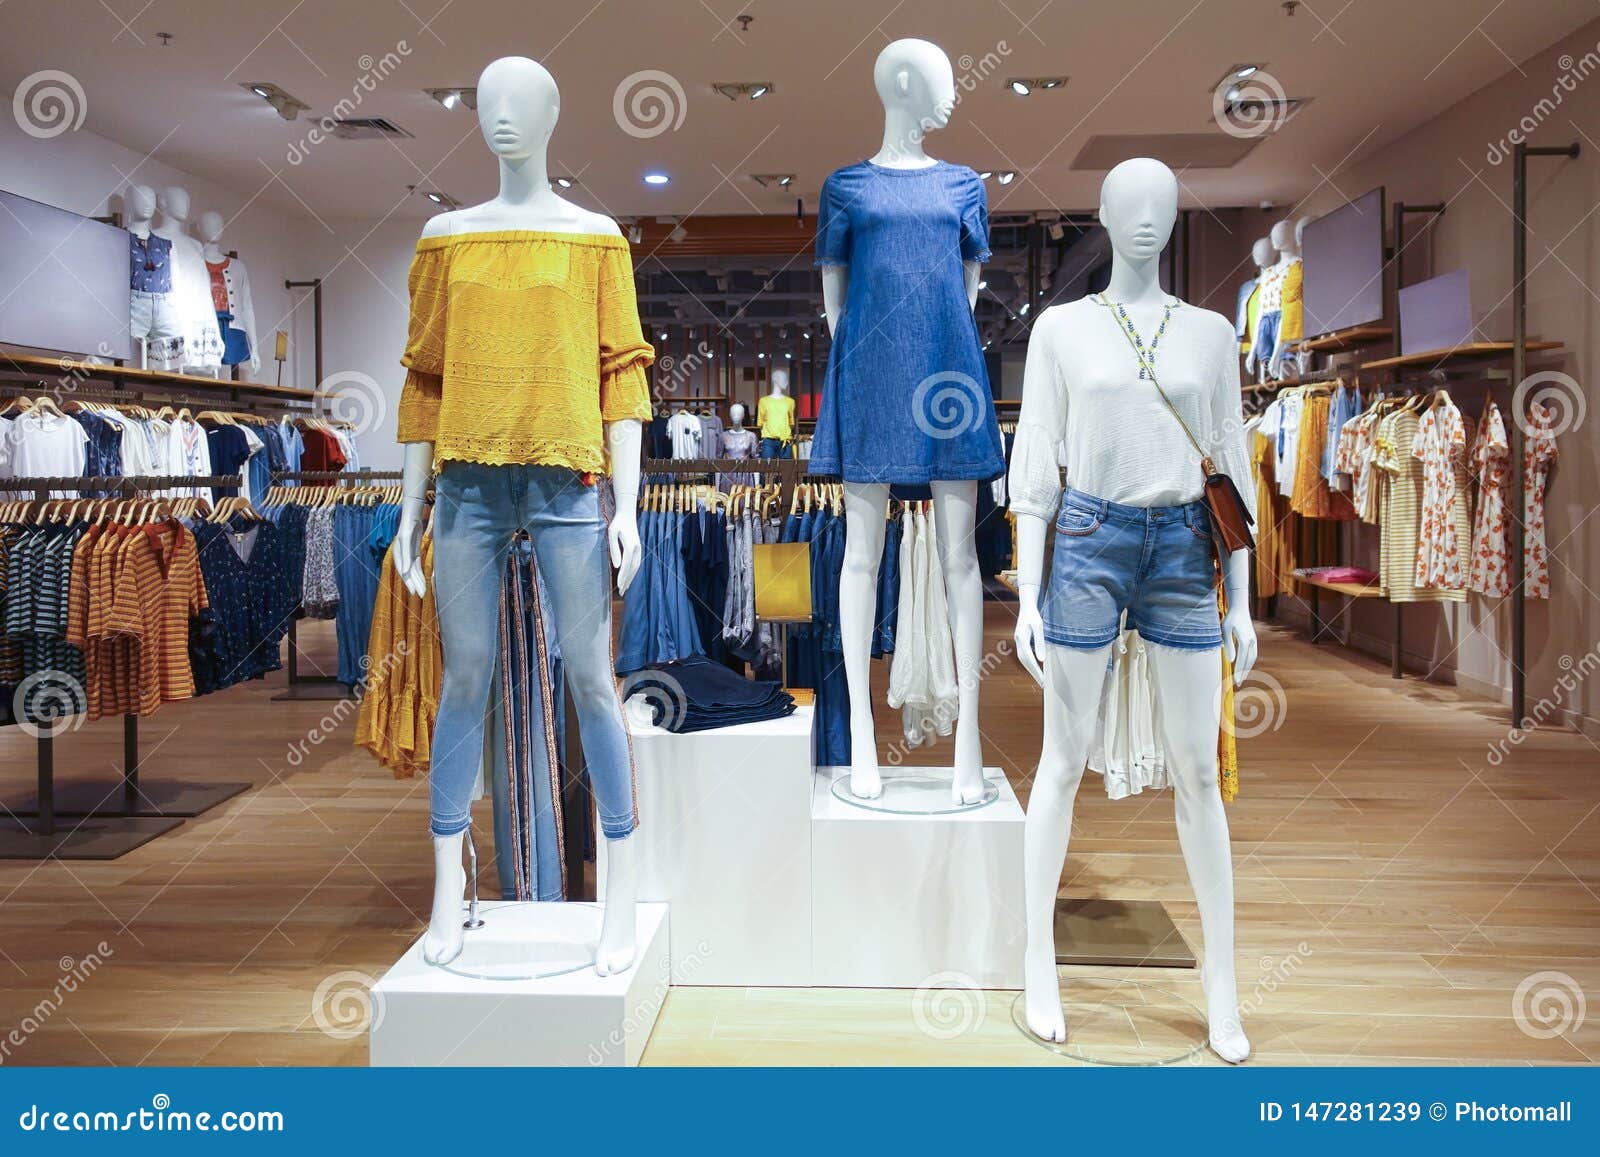 Mannequins in Lady Fashion Retail Shop Stock Image - Image of boutiques ...